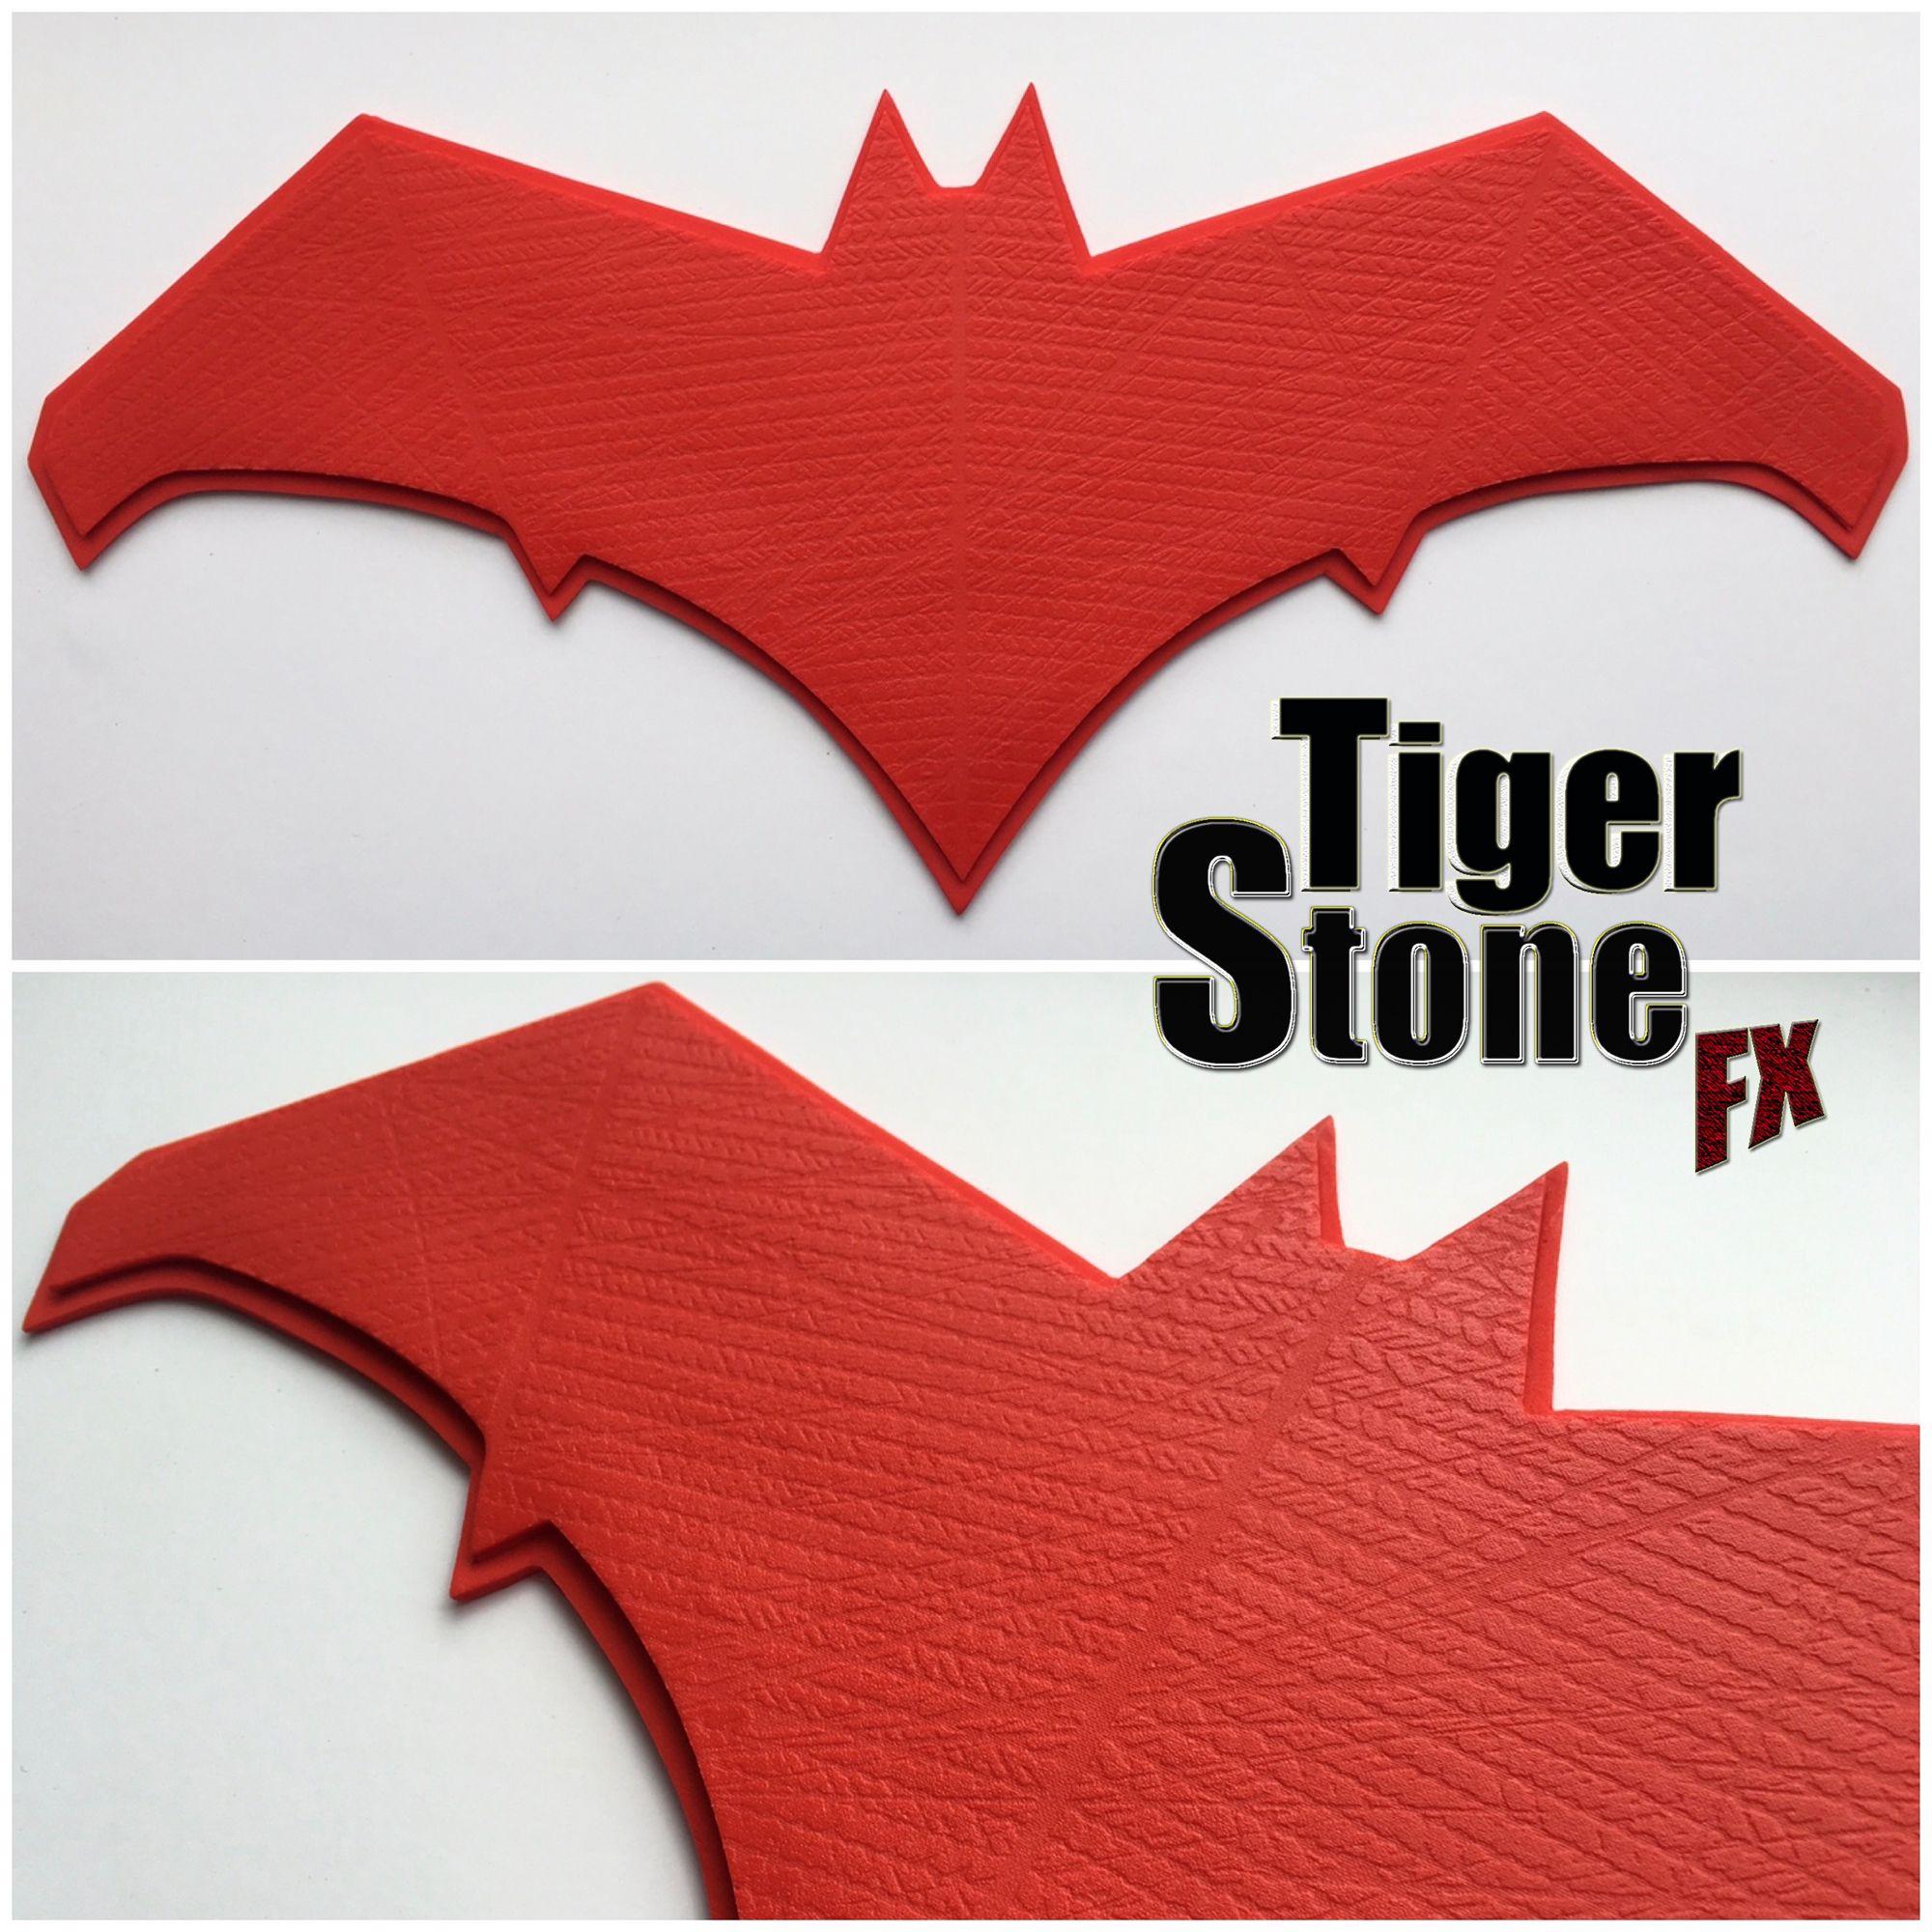 Red Hood Logo - Dawn Of Justice inspired Red Hood chest emblem - Tiger Stone FX